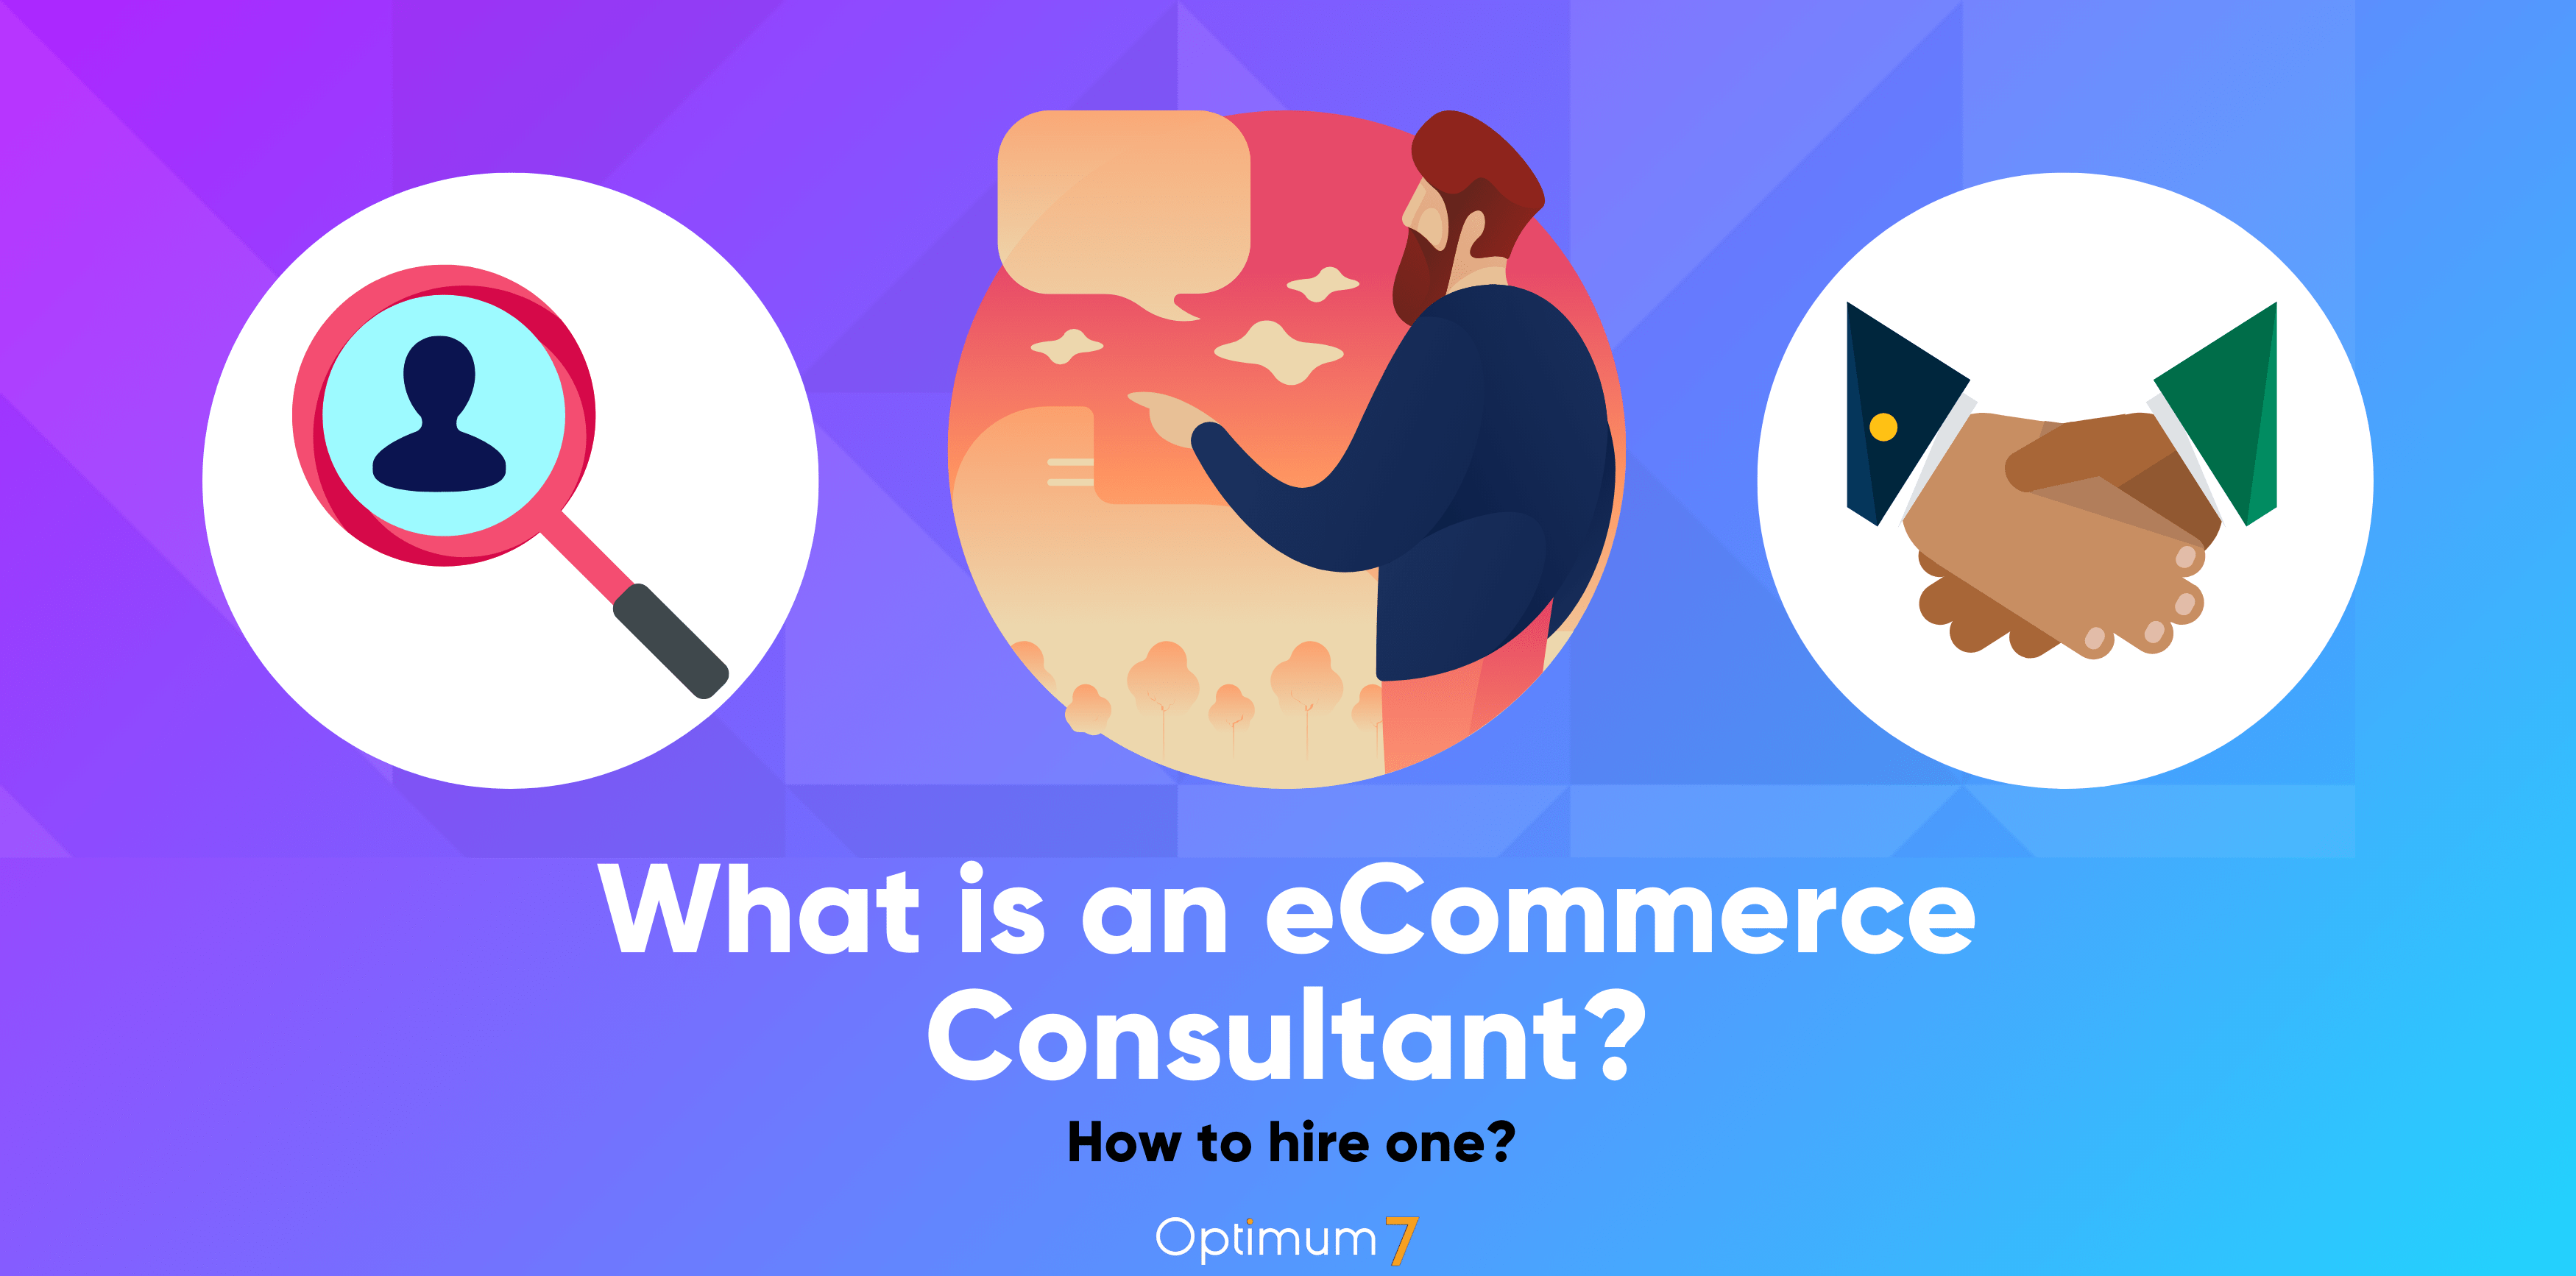 What is an eCommerce Consultant?